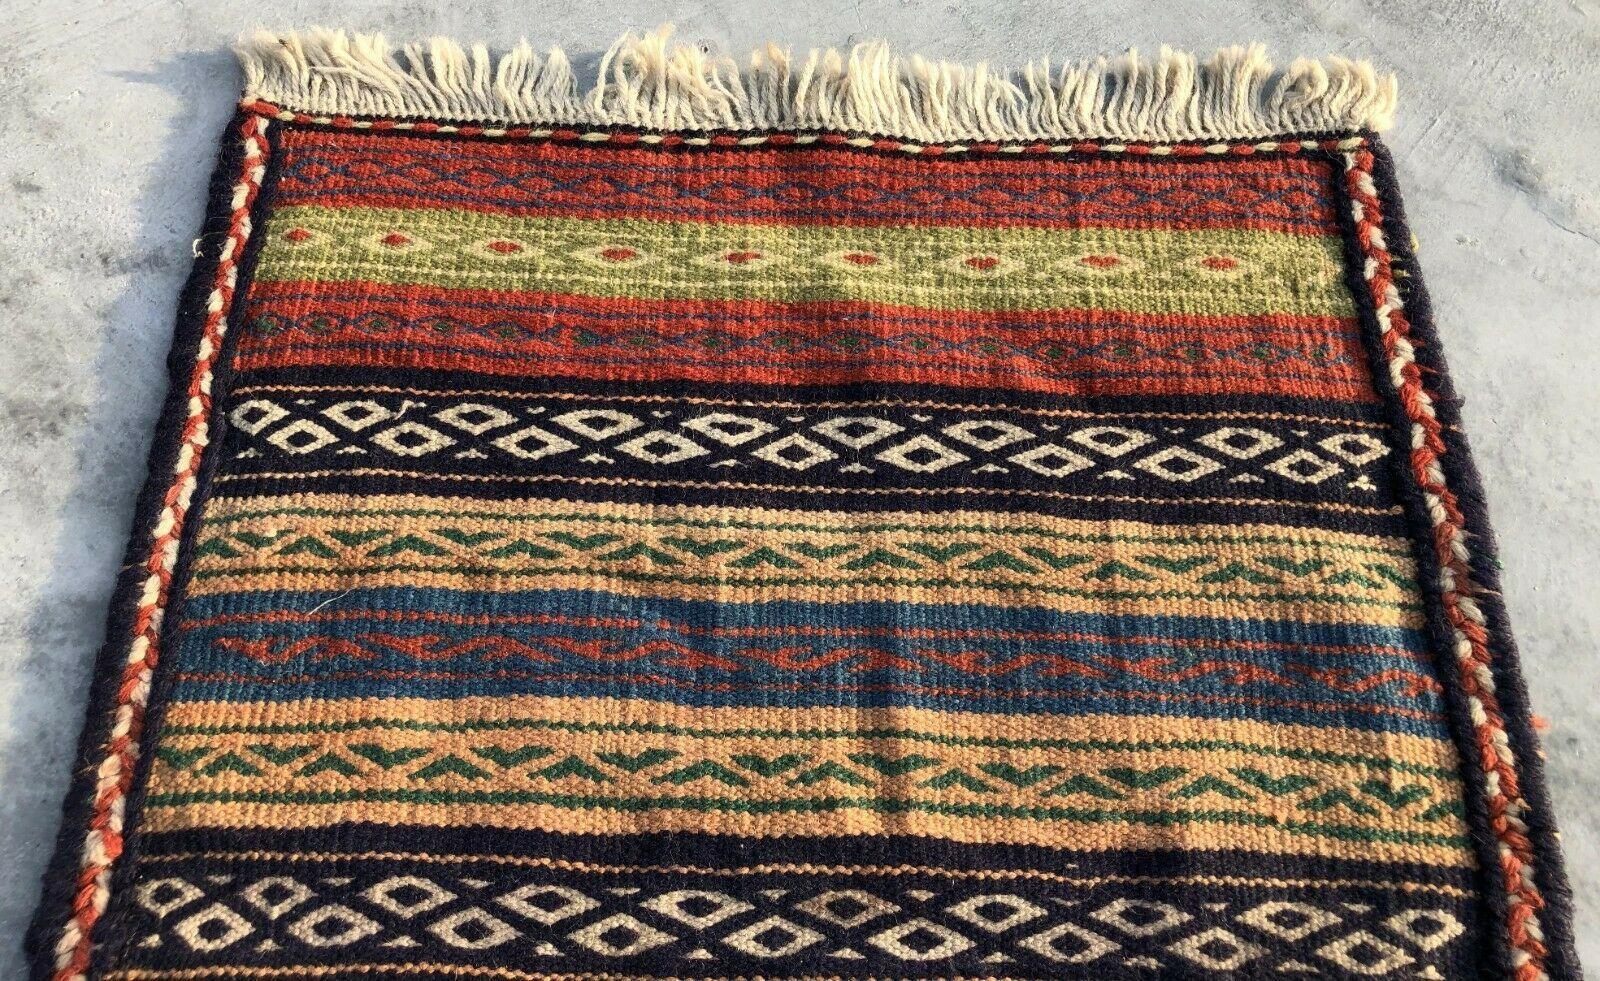 Authentic Hand Knotted Shrz Wool Kilim Kilm Area Rug 2.5 x 1.10 Ft